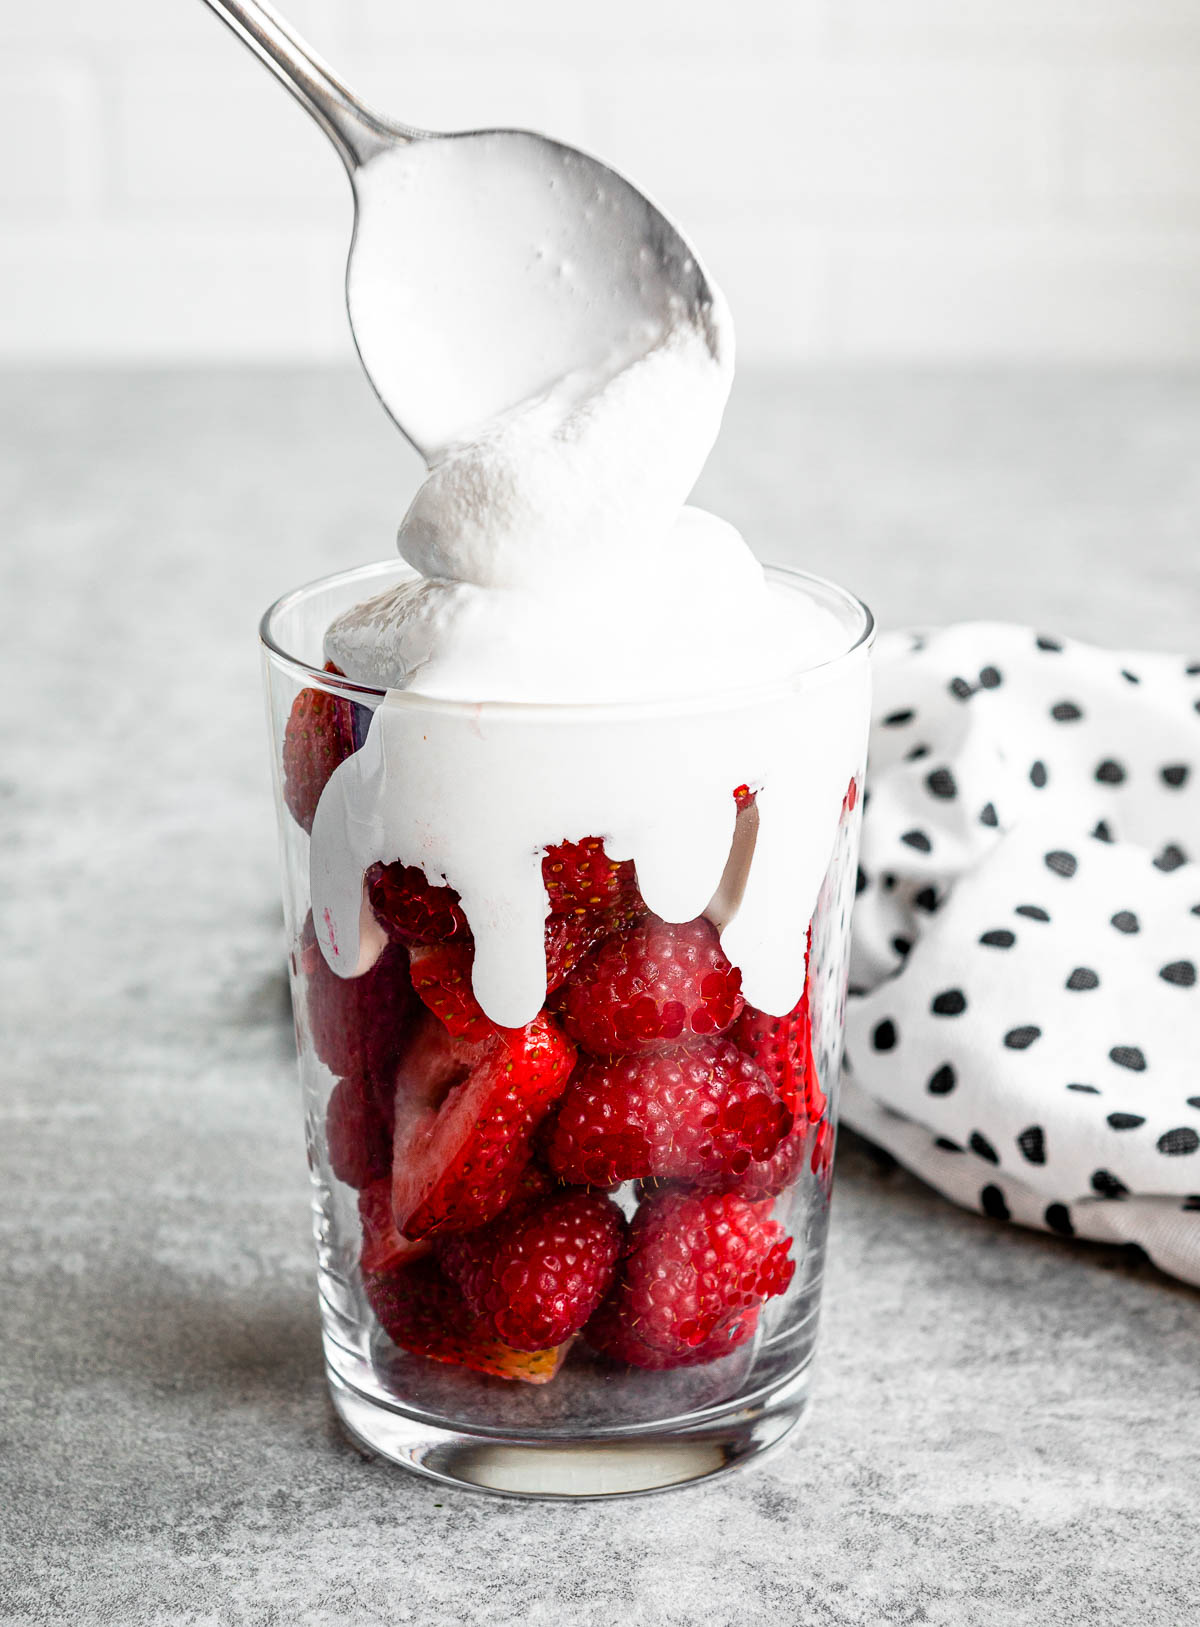 coconut whipped cream getting scooped over top of fresh strawberries in a clear glass